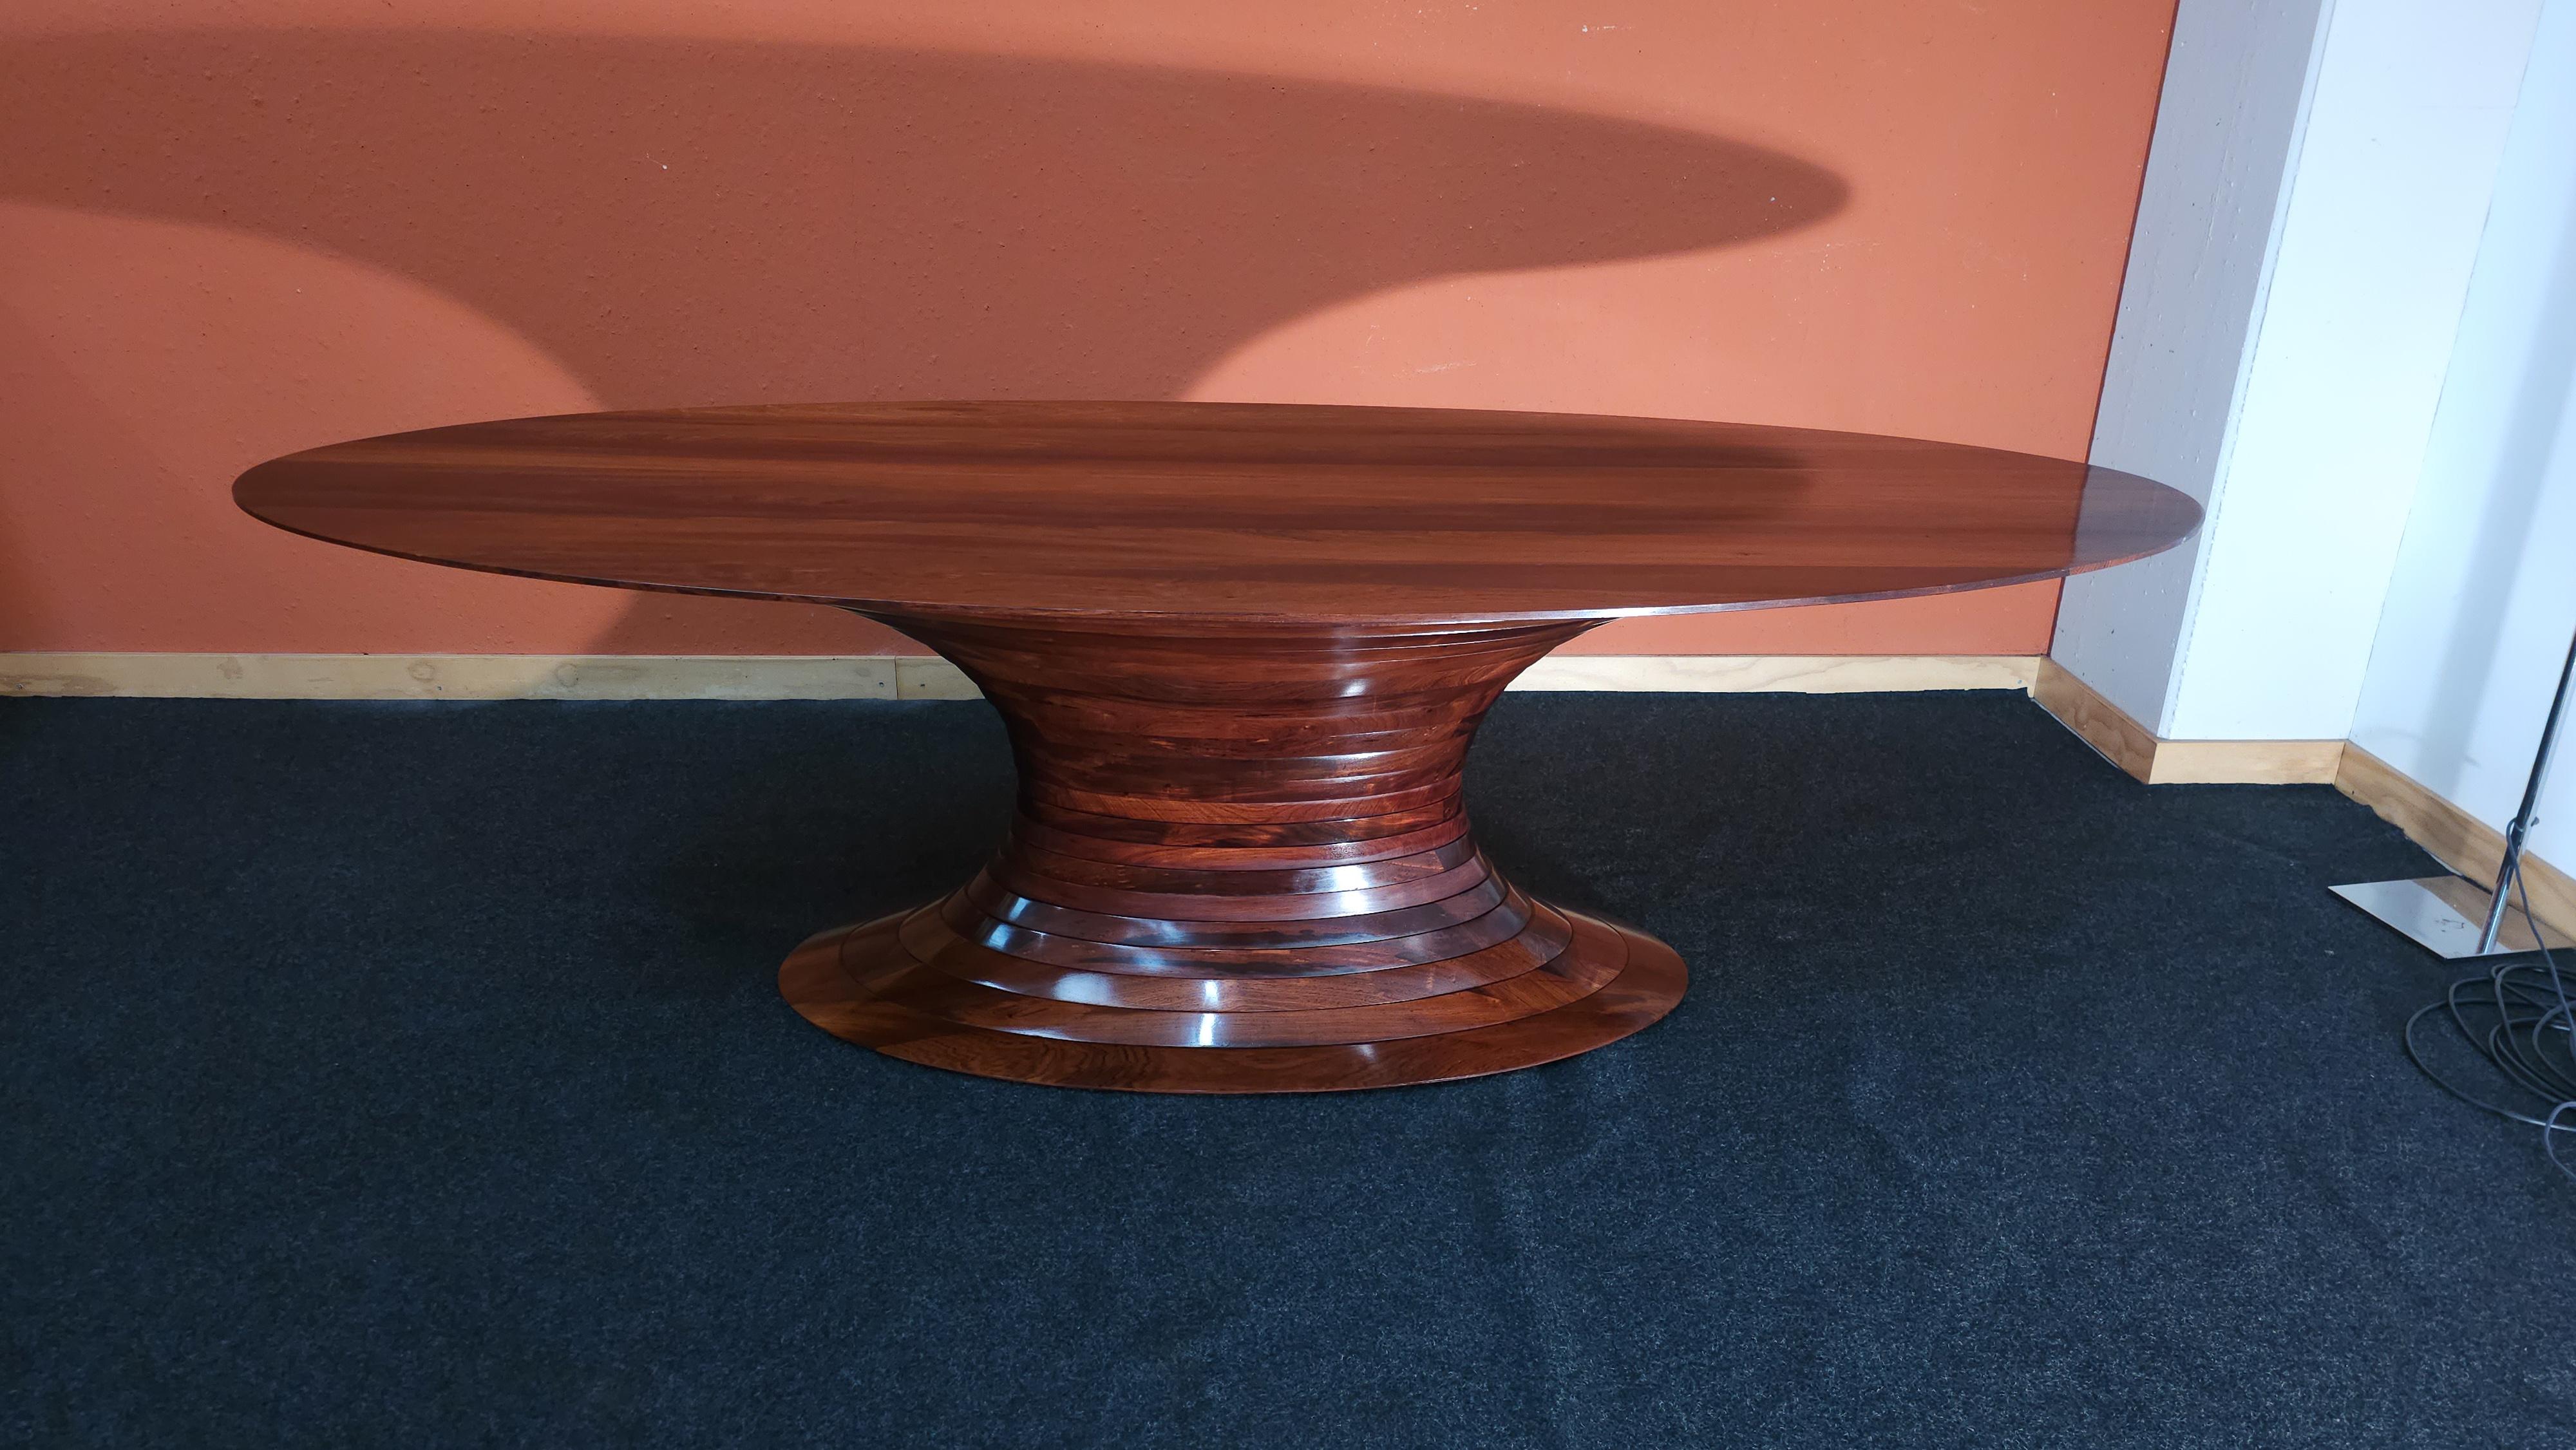 This extraordinary dining table is a handmade masterpiece crafted from exquisite Indian Rosewood, featuring twenty-two captivating concentric rings. Unrivaled in its splendor, every detail has been lovingly smoothed and finished with hand-polished